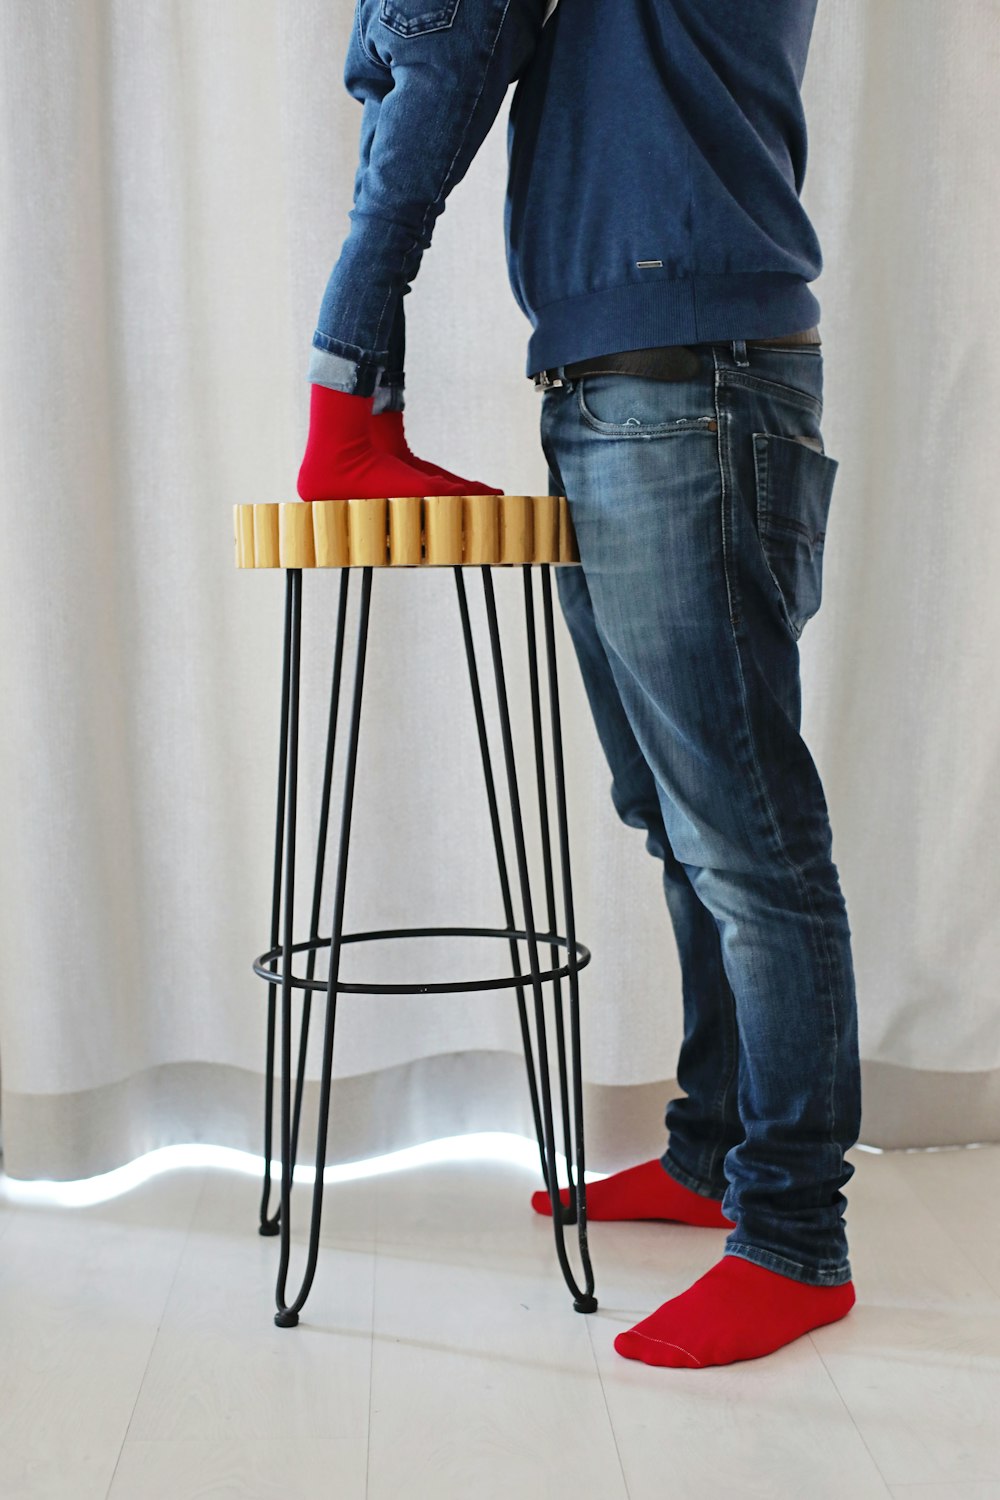 a man standing on a stool with a pair of red shoes on top of it